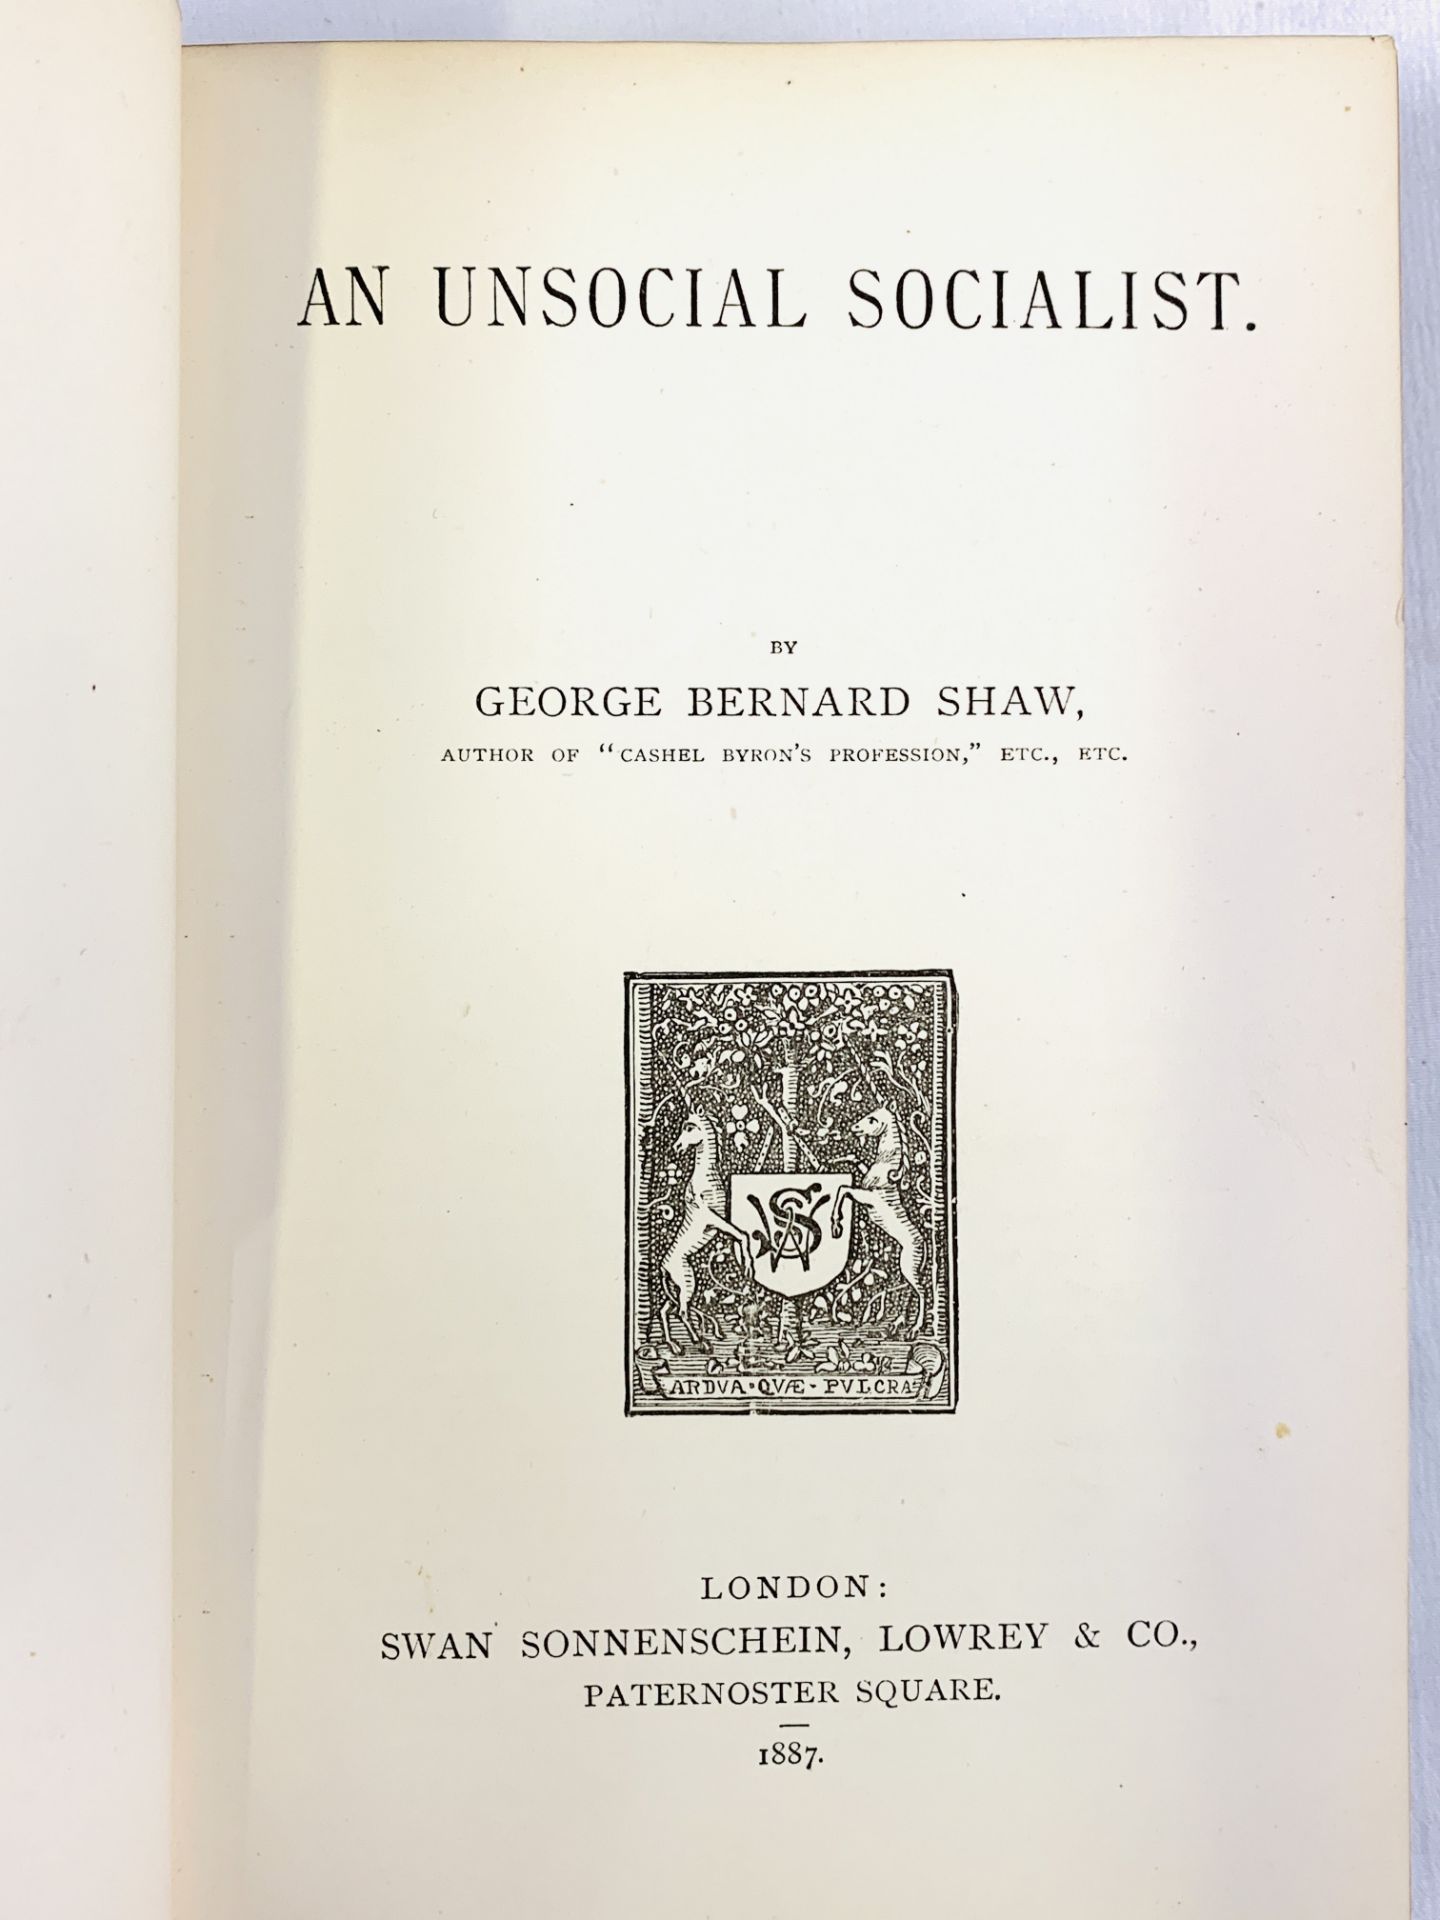 An Unsocial Socialist by George Bernard Shaw, 1887. Half leather bound. - Image 2 of 3